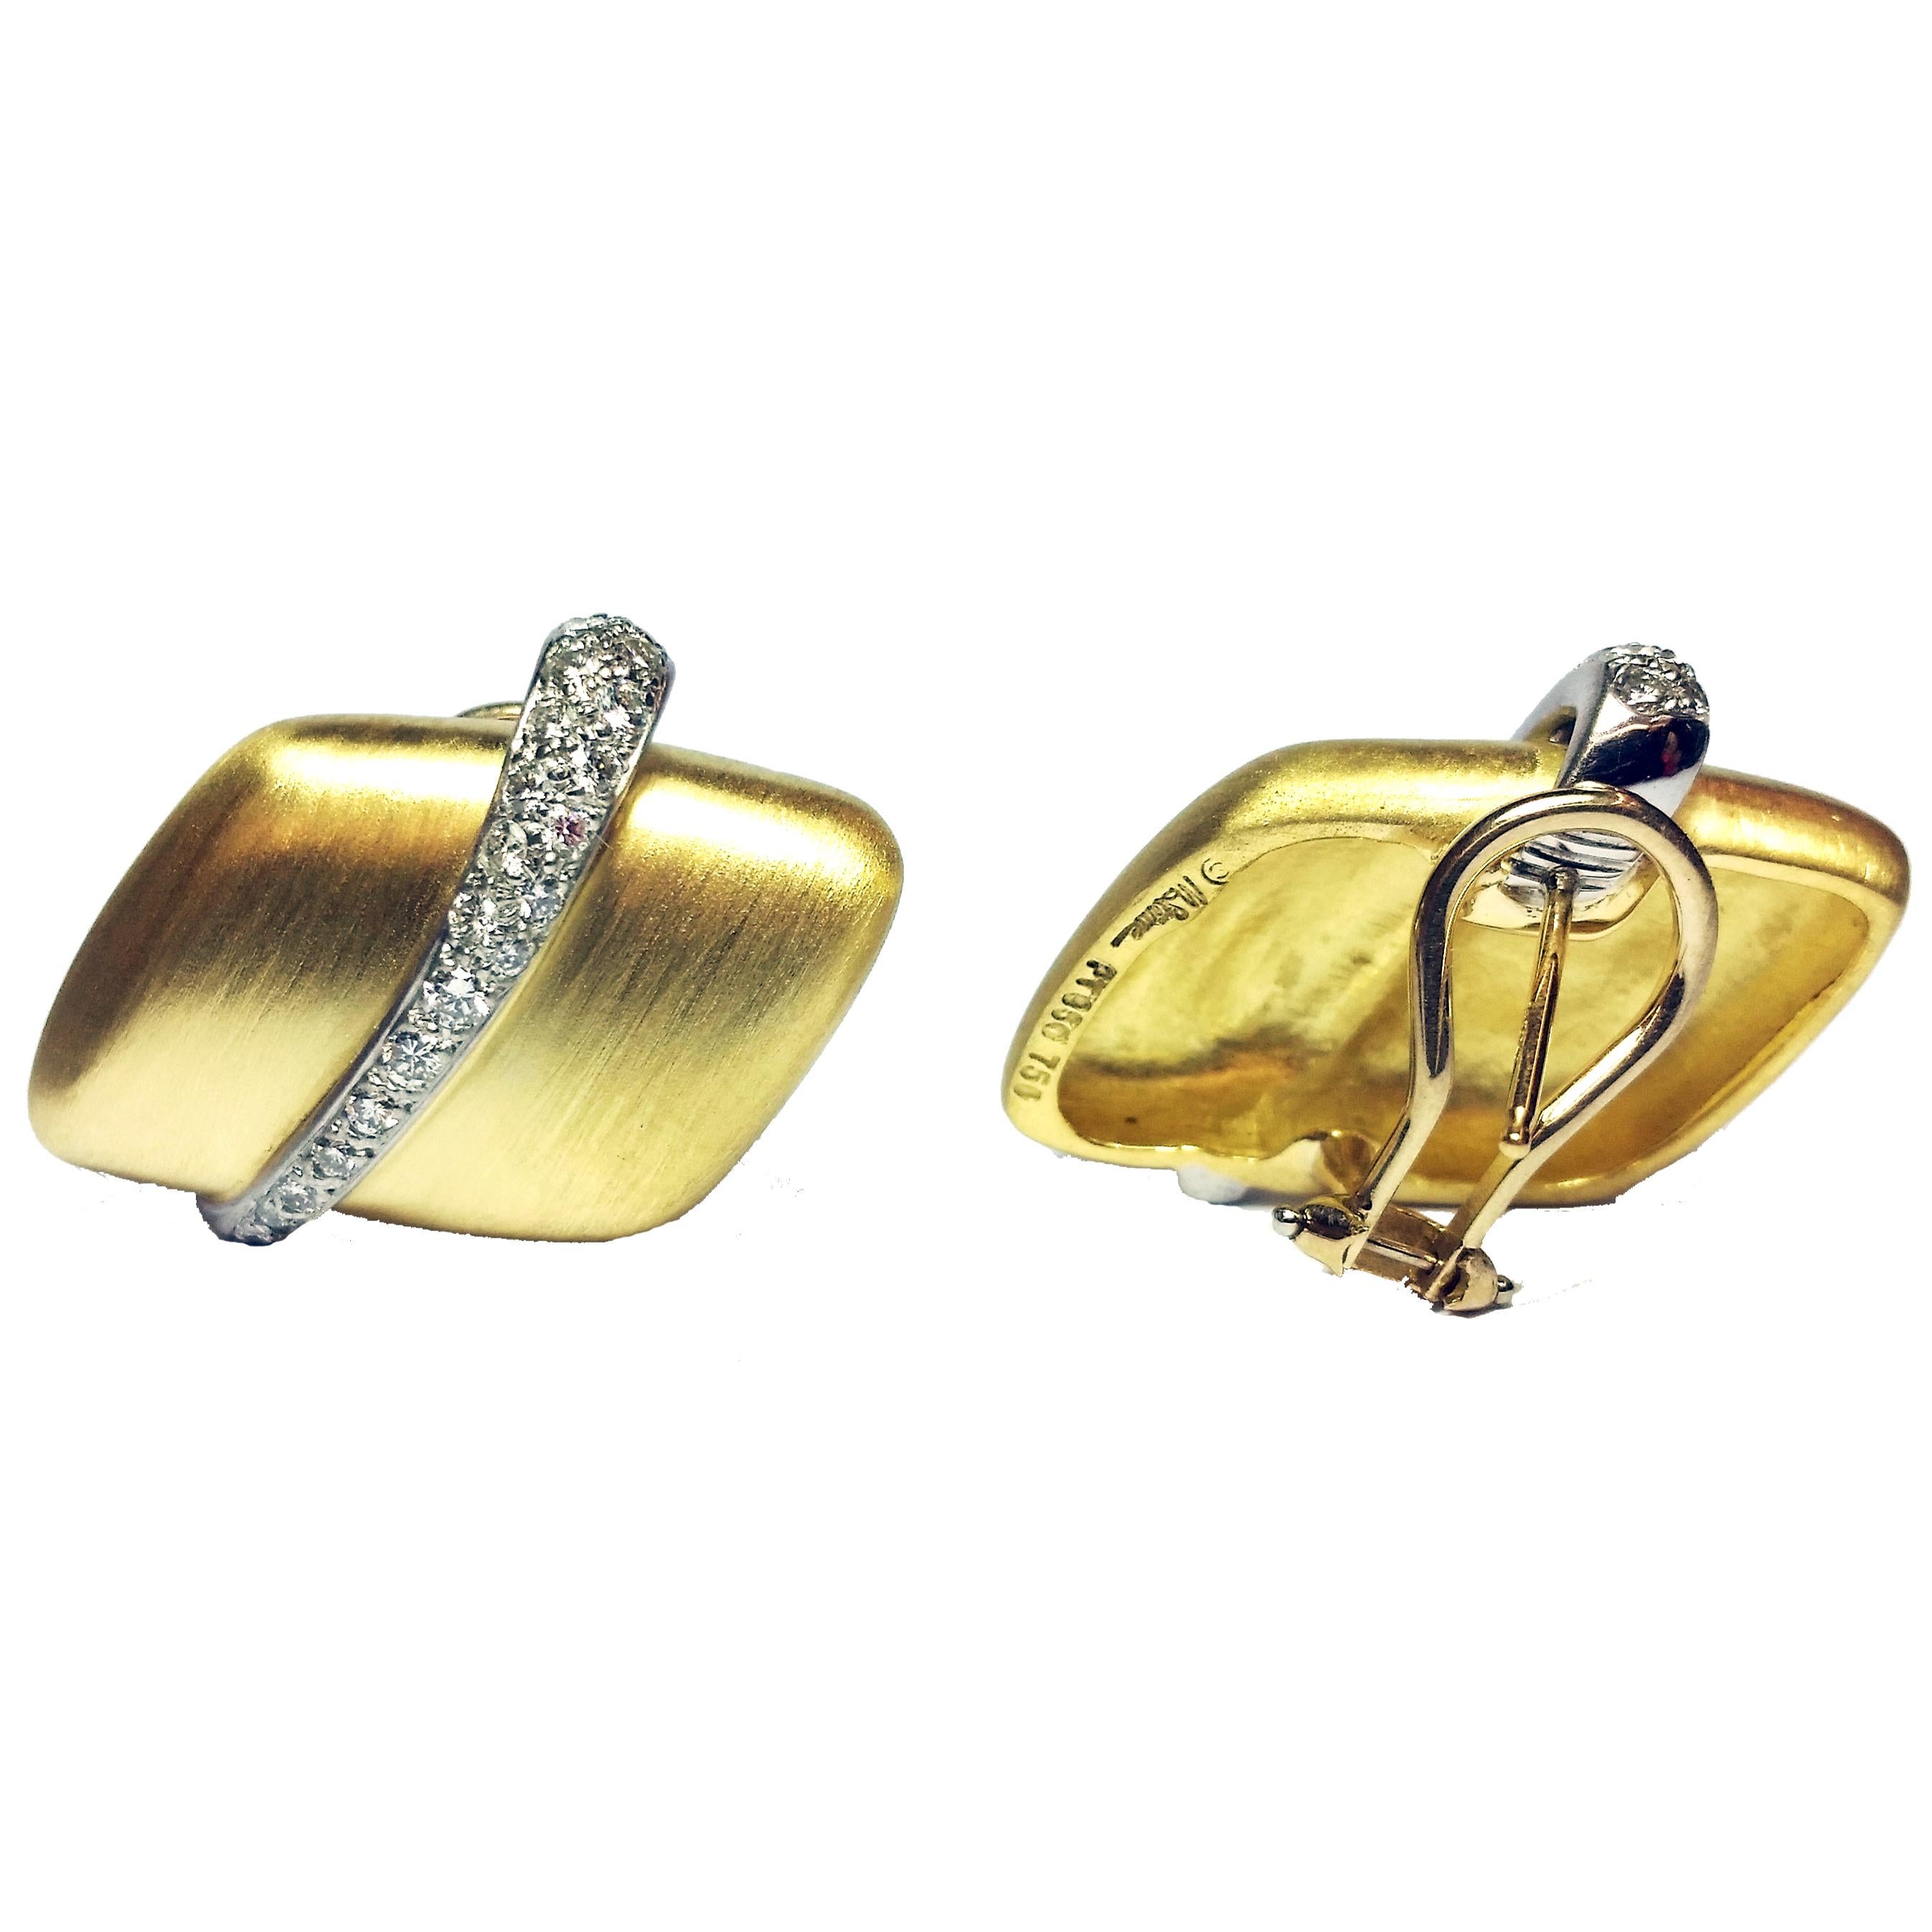 18 Karat Brushed Yellow Gold and Platinum Earrings Featuring 42 Round Diamonds Totaling Approximately 0.75 Carats of VS Clarity & G Color. Post with Omega Clip Back. (We can cut & polish off posts for non-pierced ears) Finished Weight is 21.0 Grams.